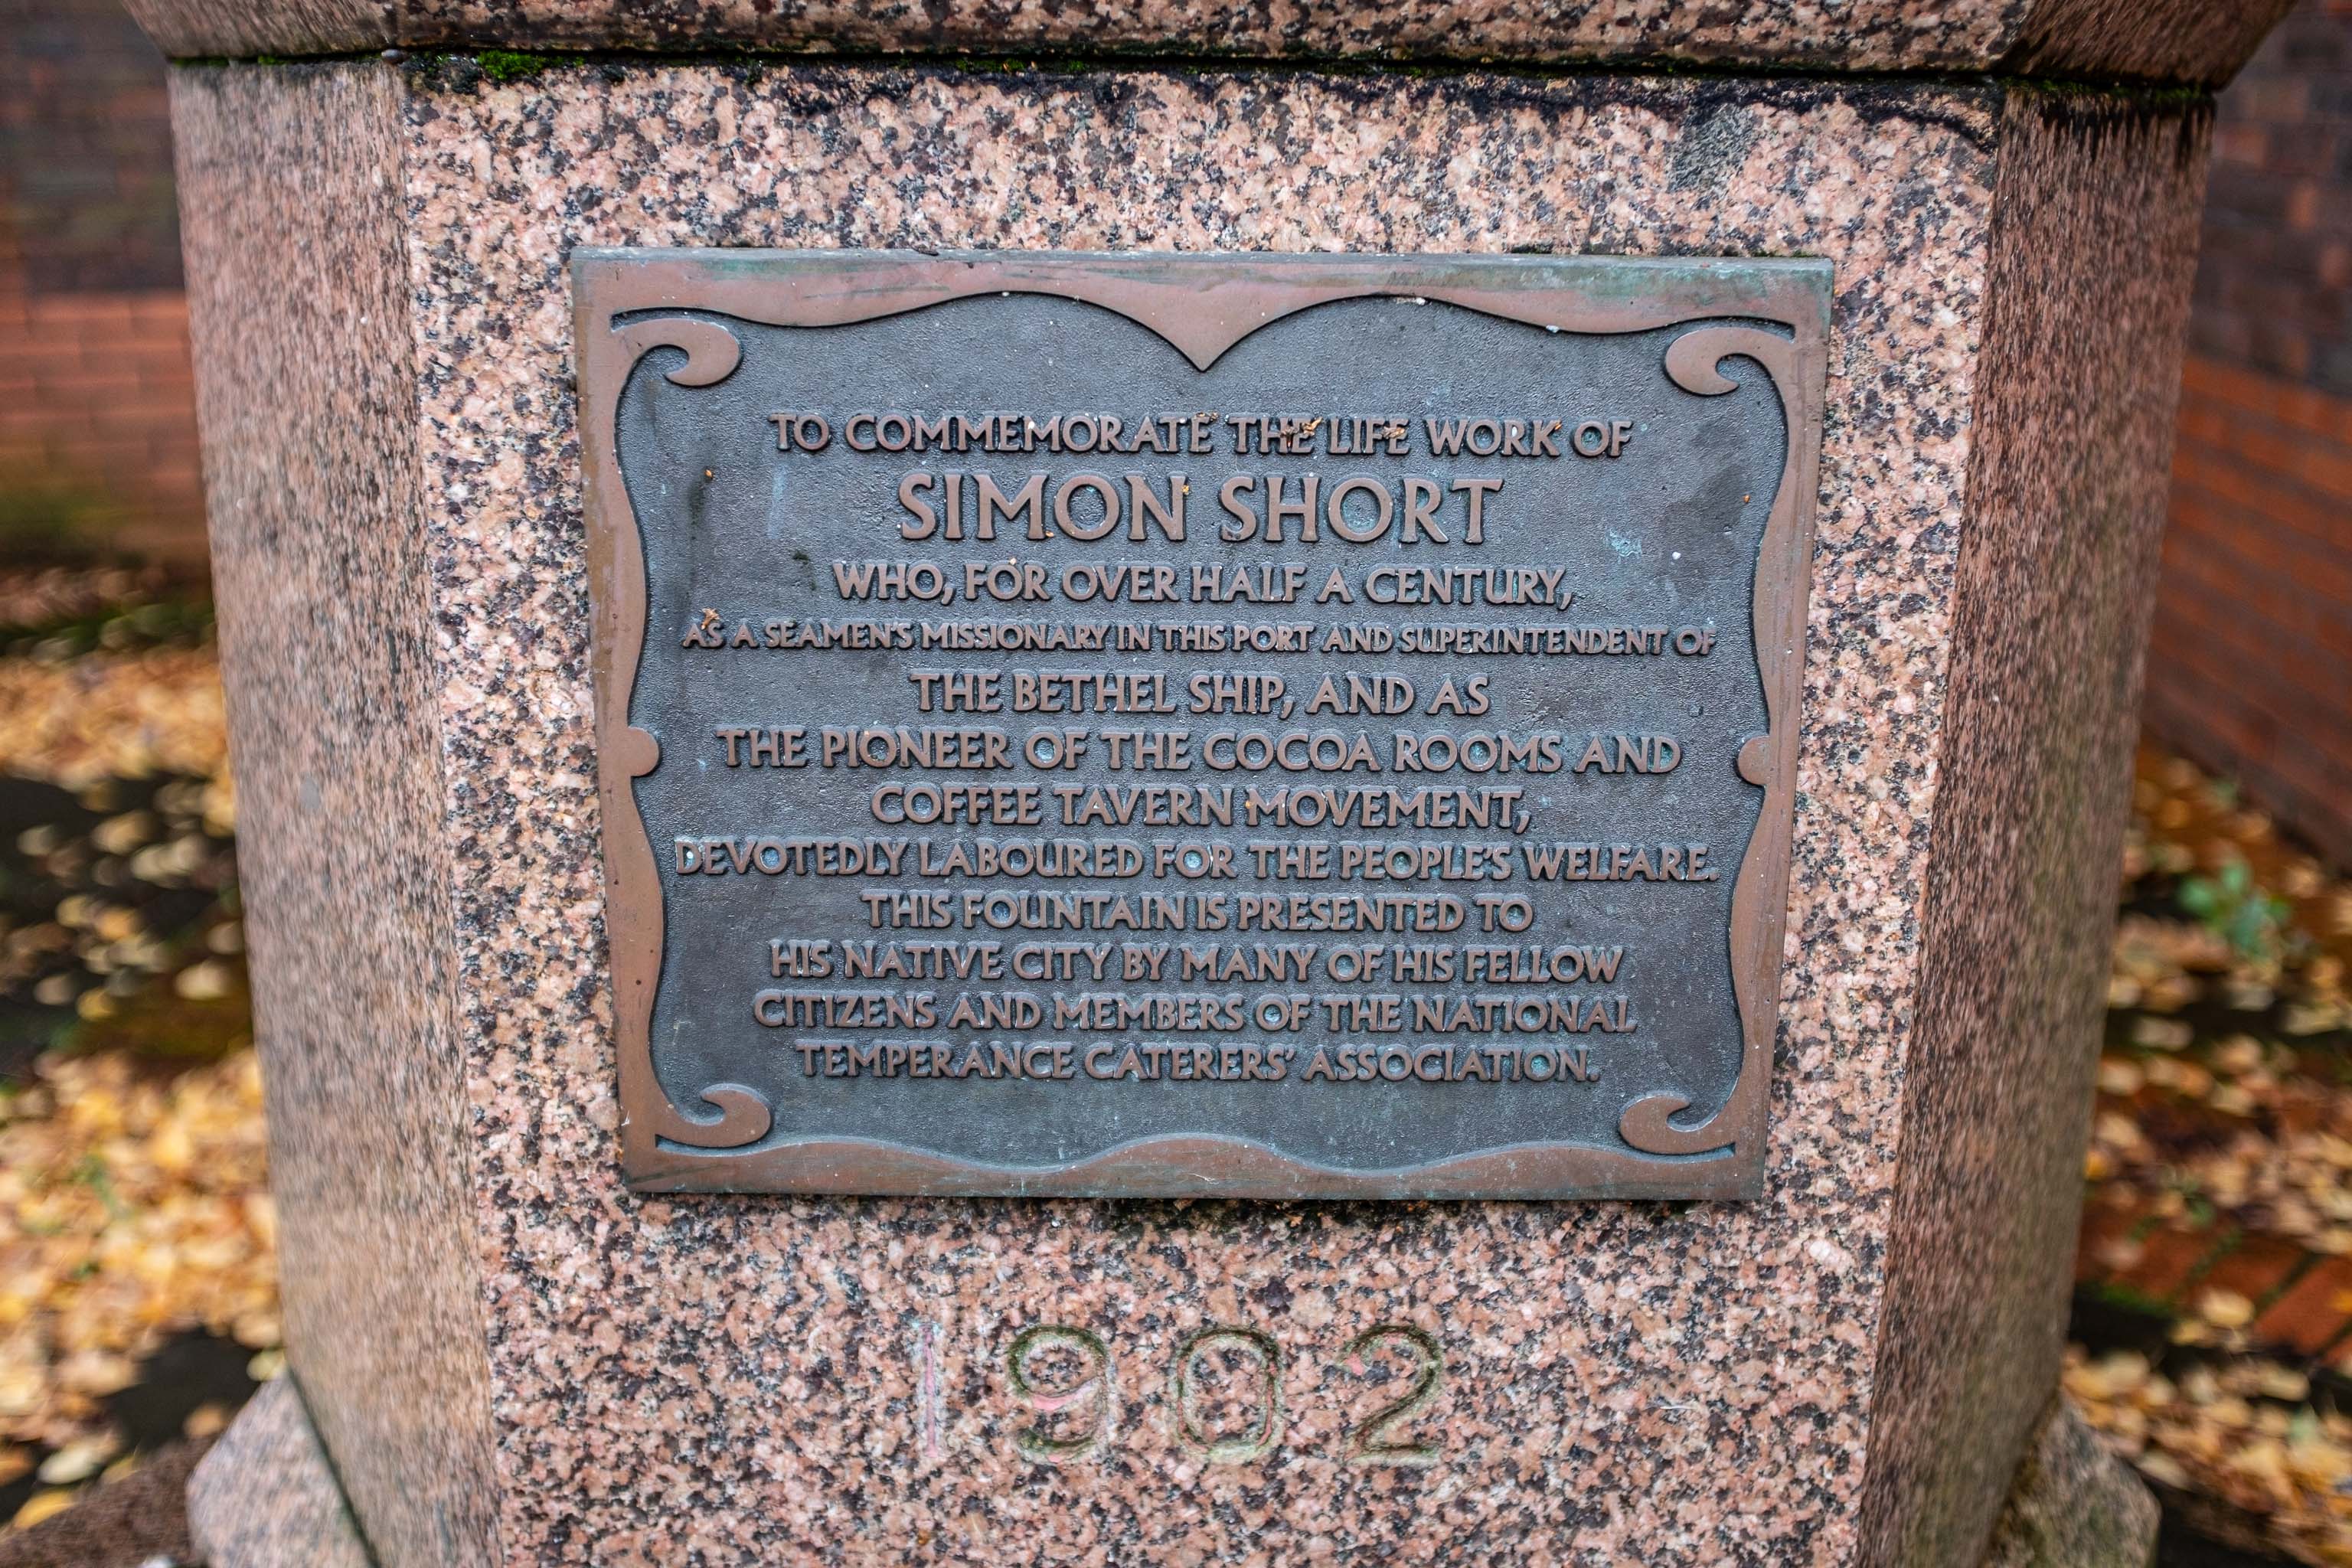 Simon Short
A bethel ship was a kind of floating church; it would moor up near other ships and the sailors could board it for worship.
